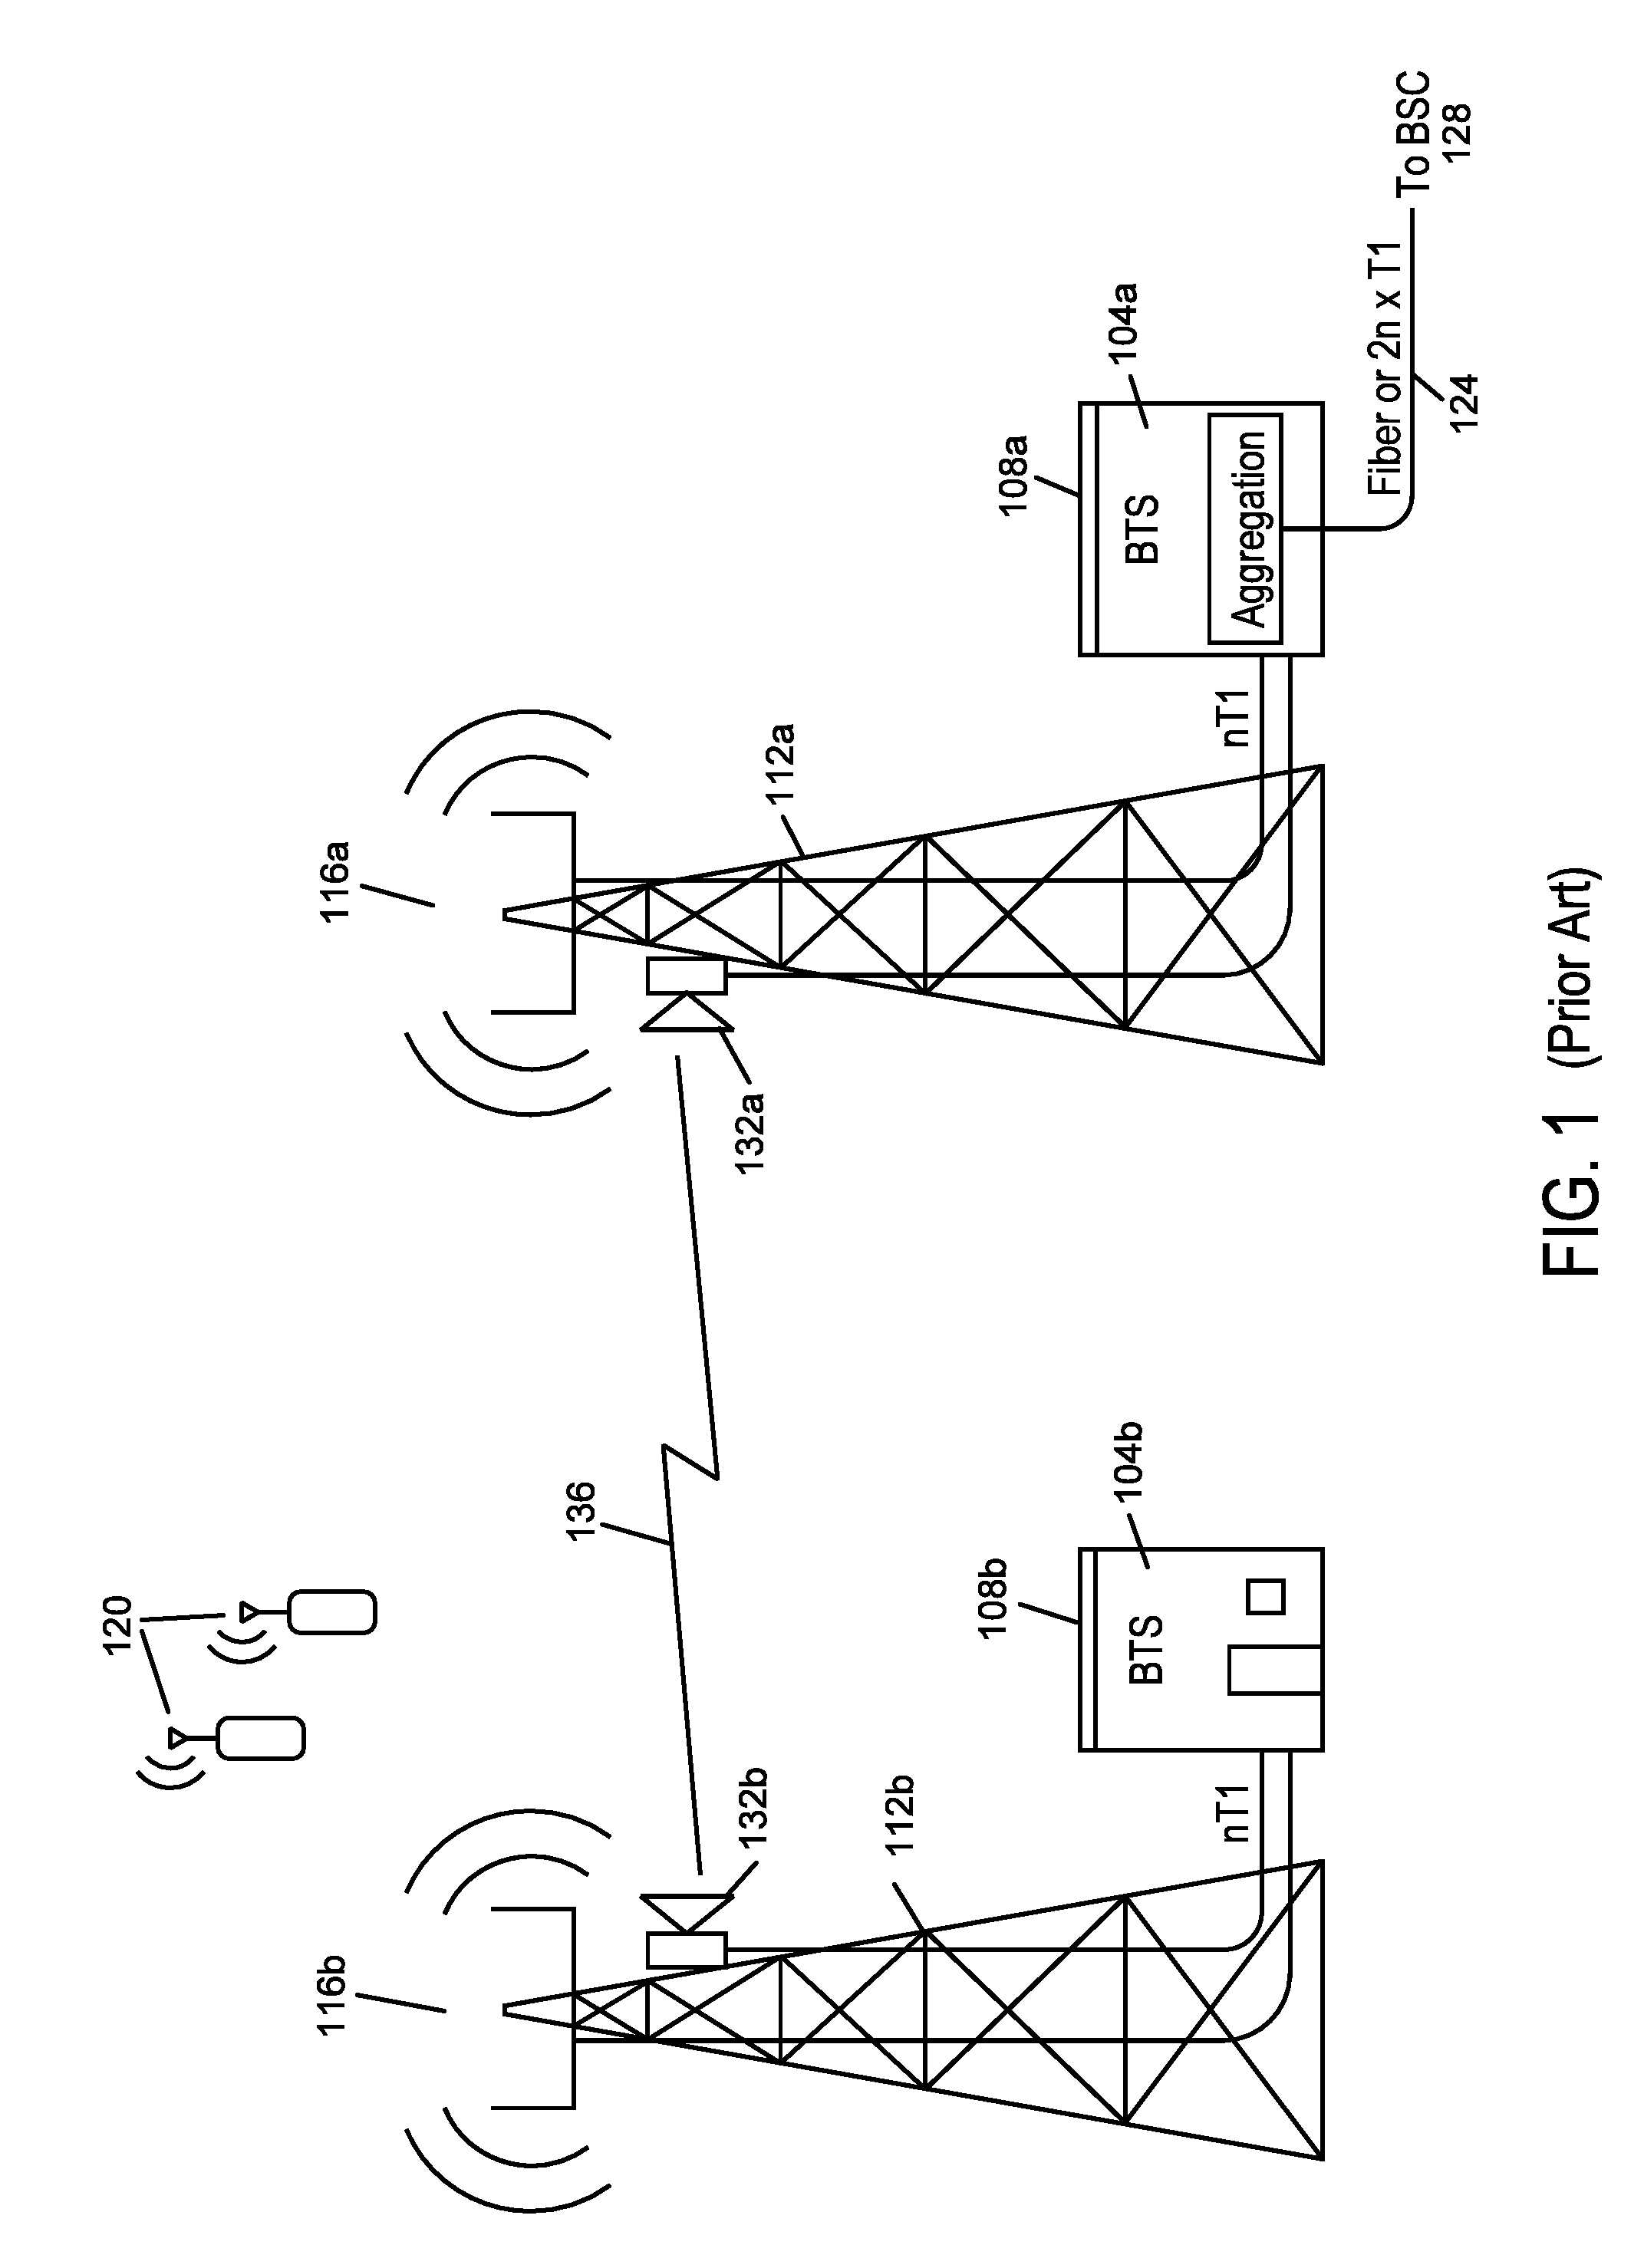 Backhaul radio with a substrate tab-fed antenna assembly